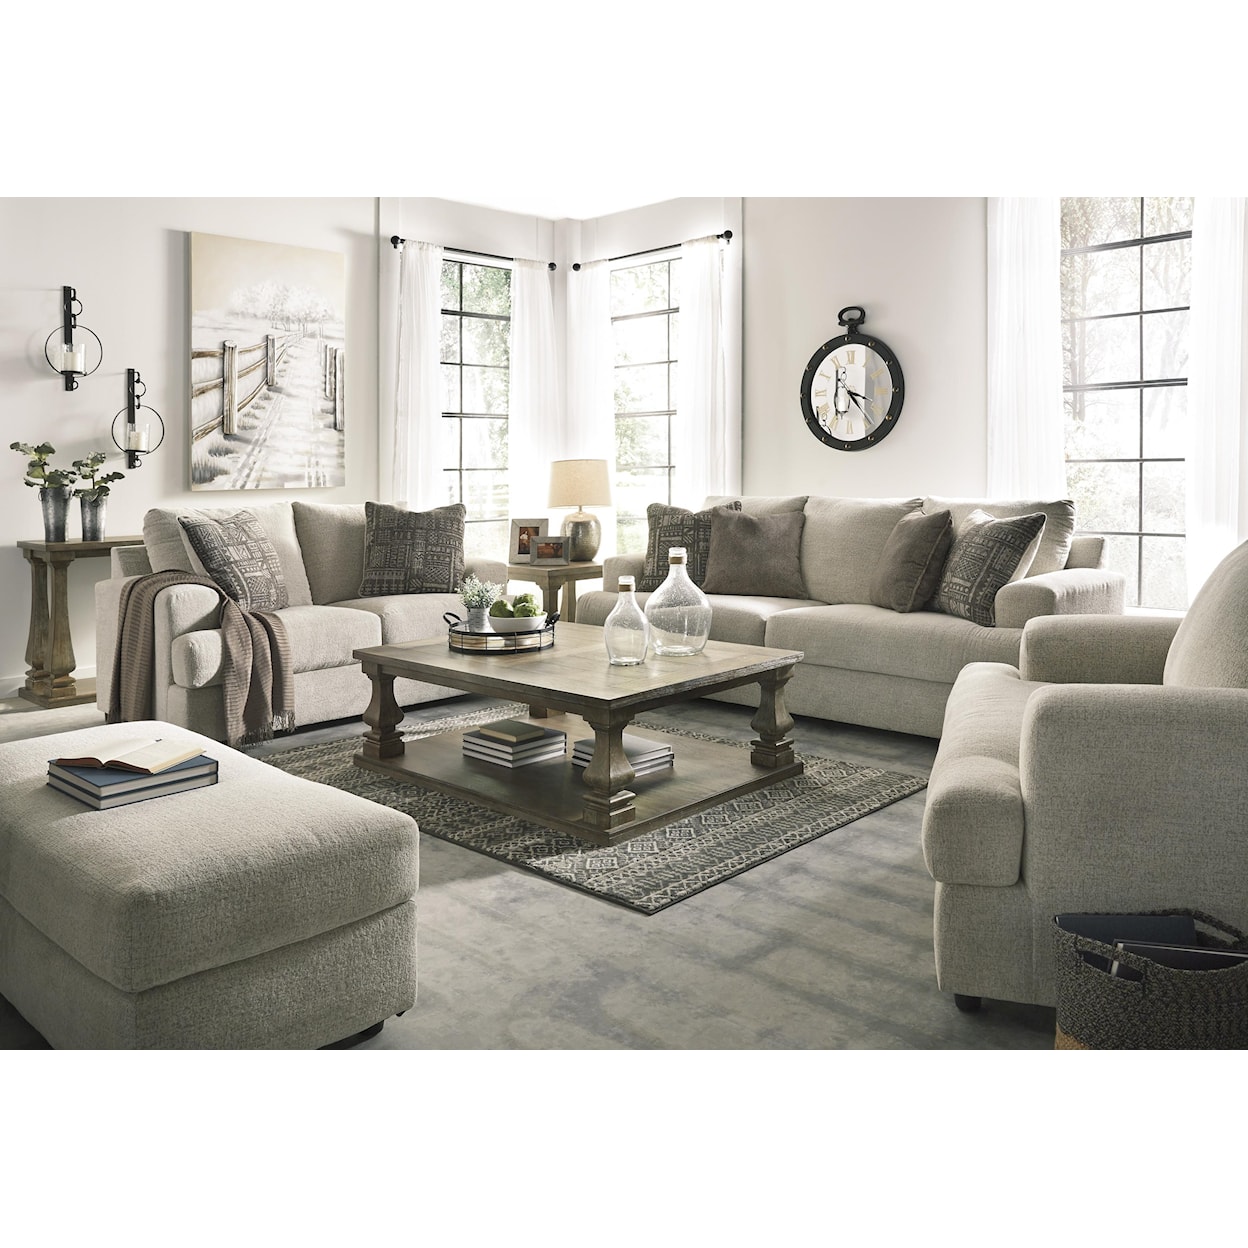 Signature Design by Ashley Soletren Sofa, Loveseat and Chair Set